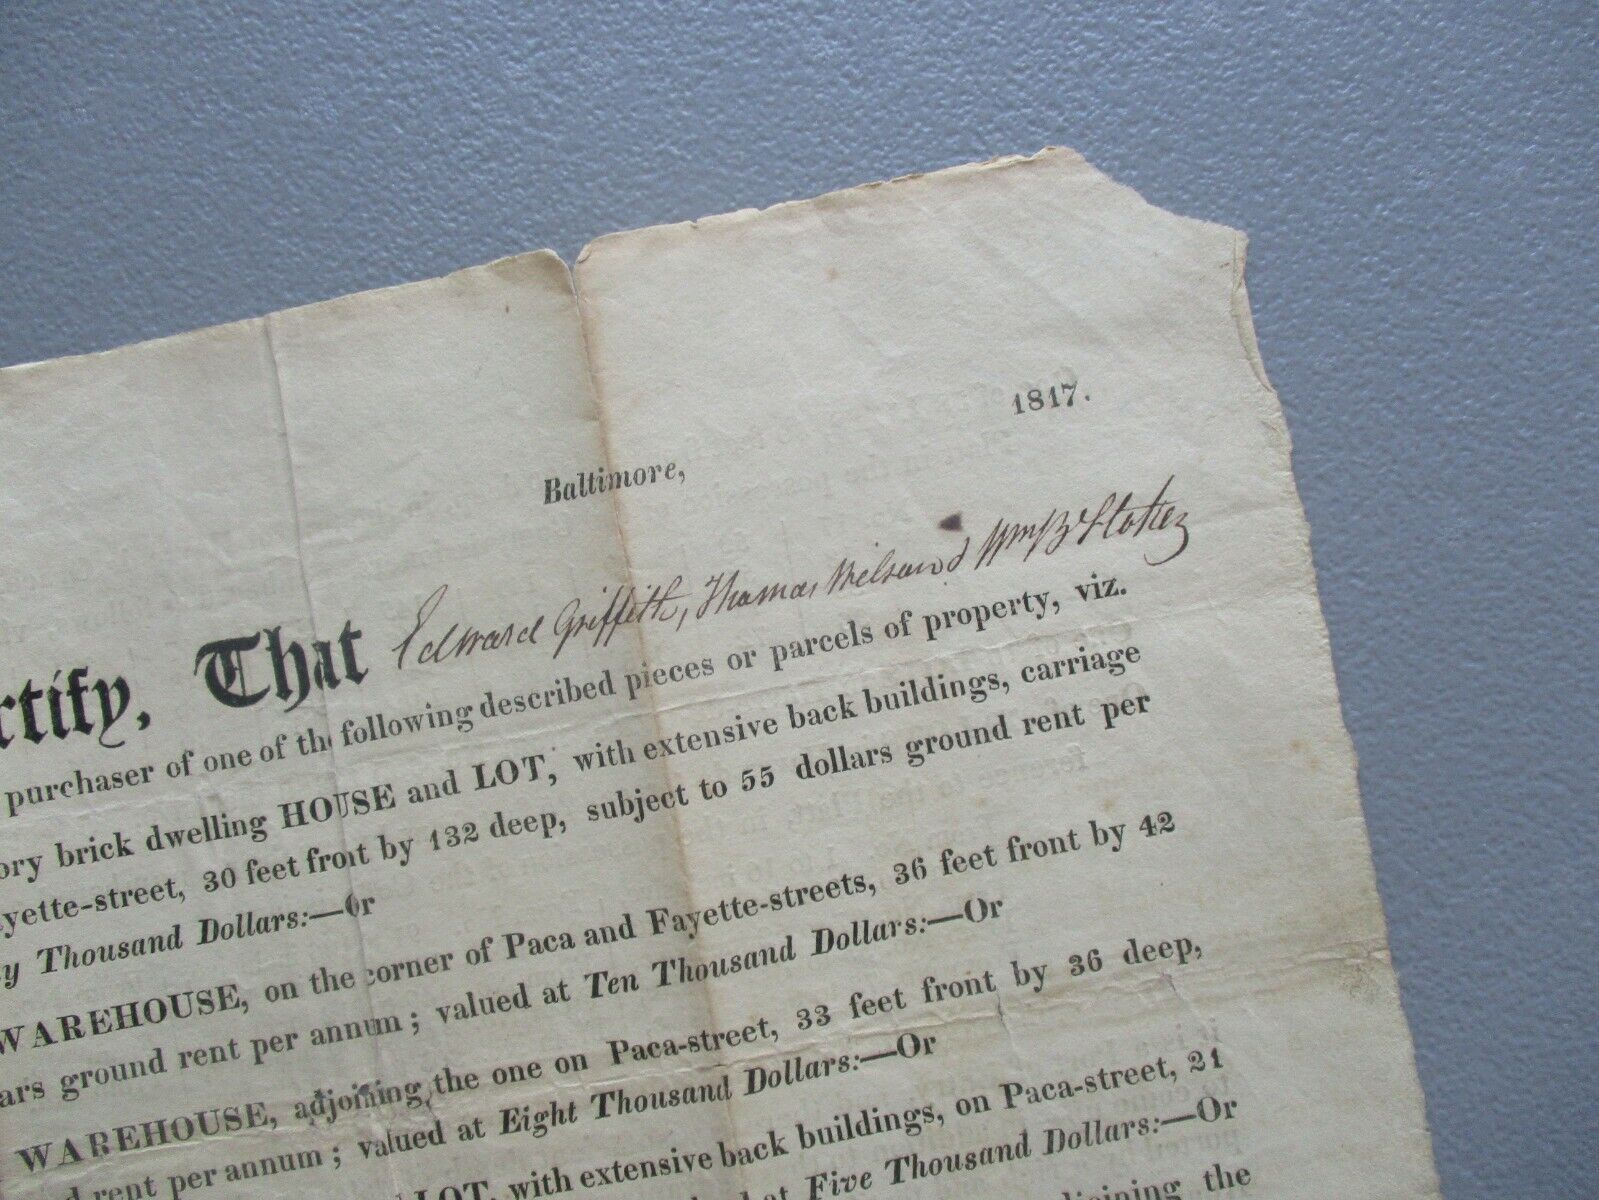 1817 Baltimore,(unknown signatures) Revolutionary War Captain Finley,signed deed